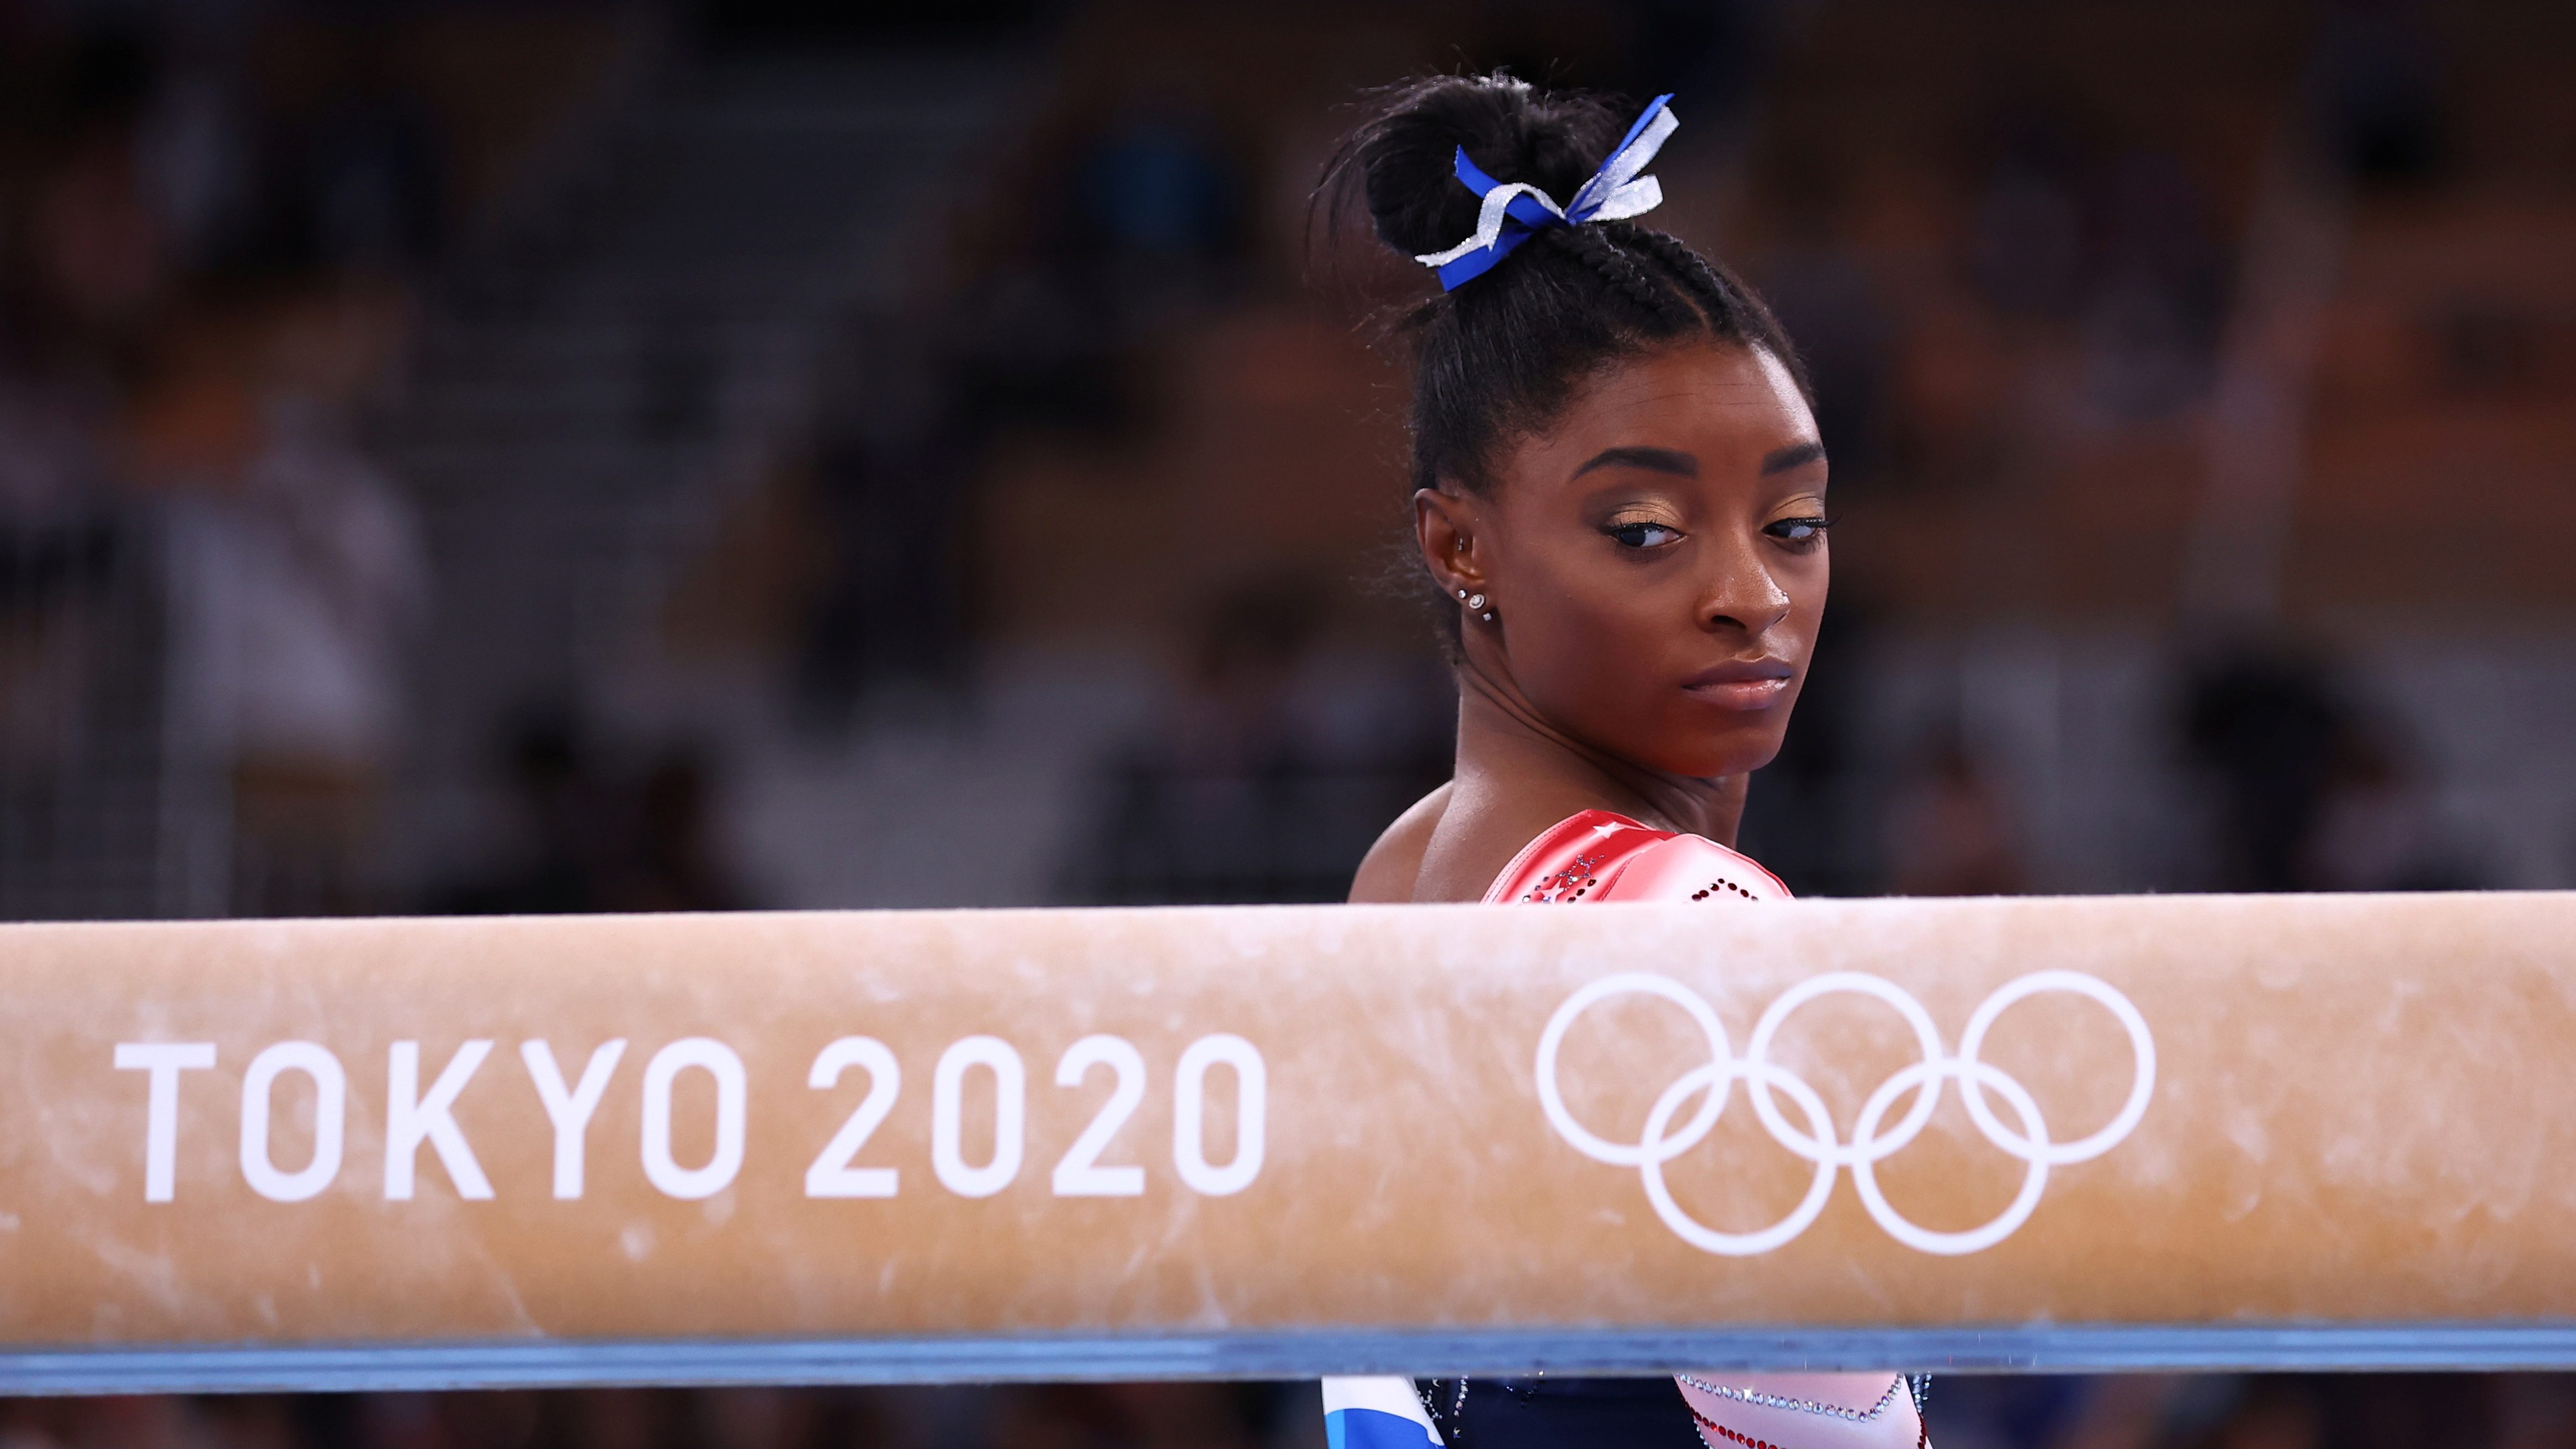 Simone Biles Among Presidential Medal of Freedom Recipients